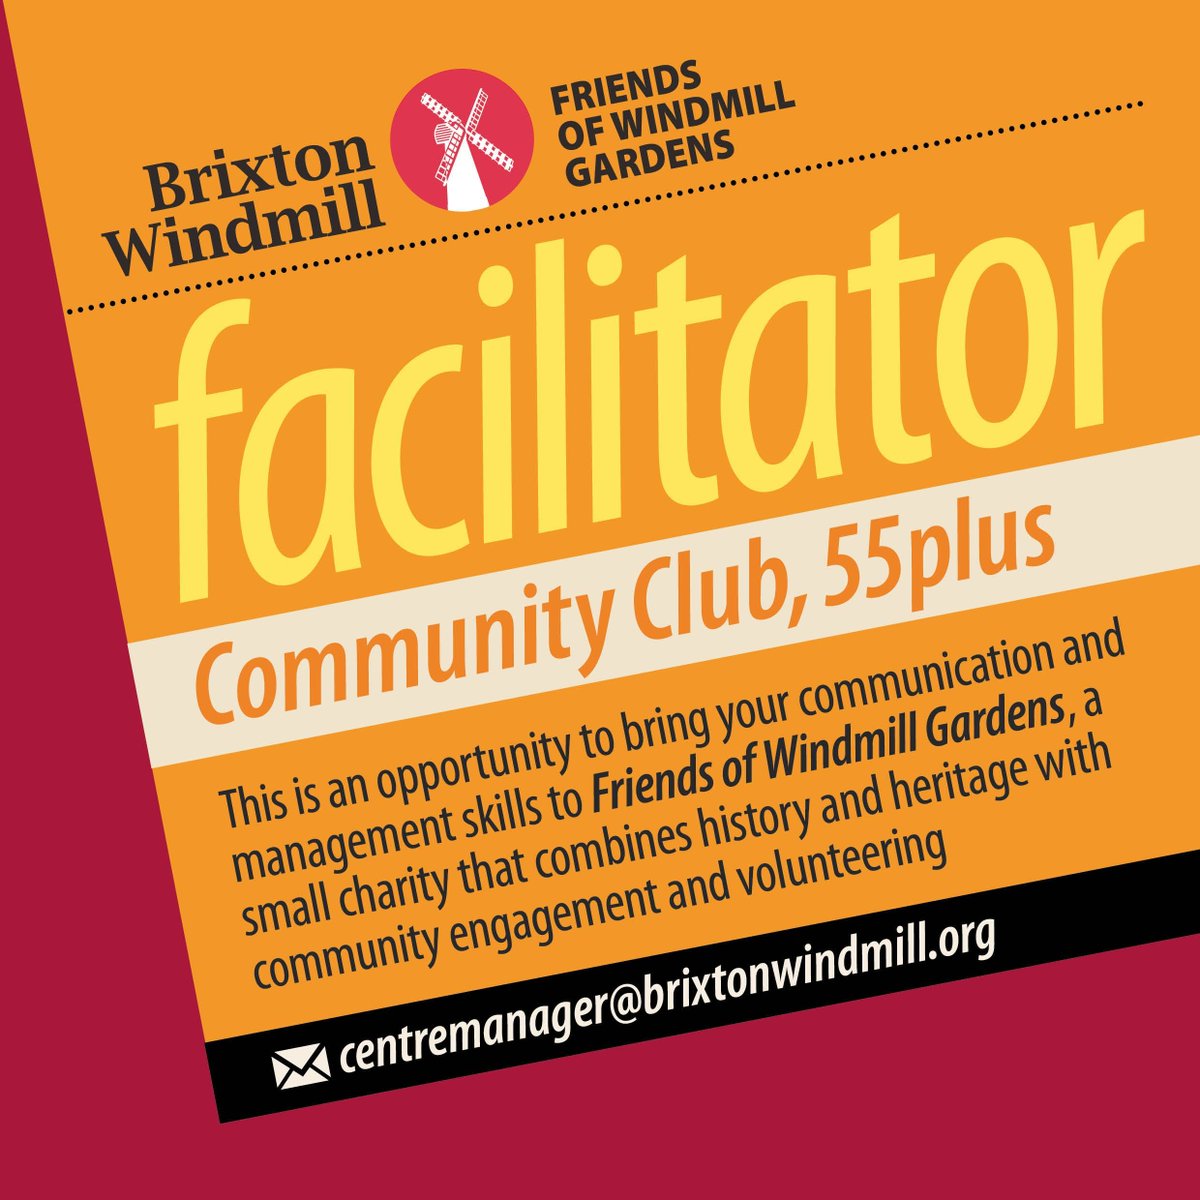 Lovely new paid role available here - we are looking for a new Community Club Facilitator for our Thursday club. Help plan activities, lunch and more! Deadline 5 April. buff.ly/3UwT6oR